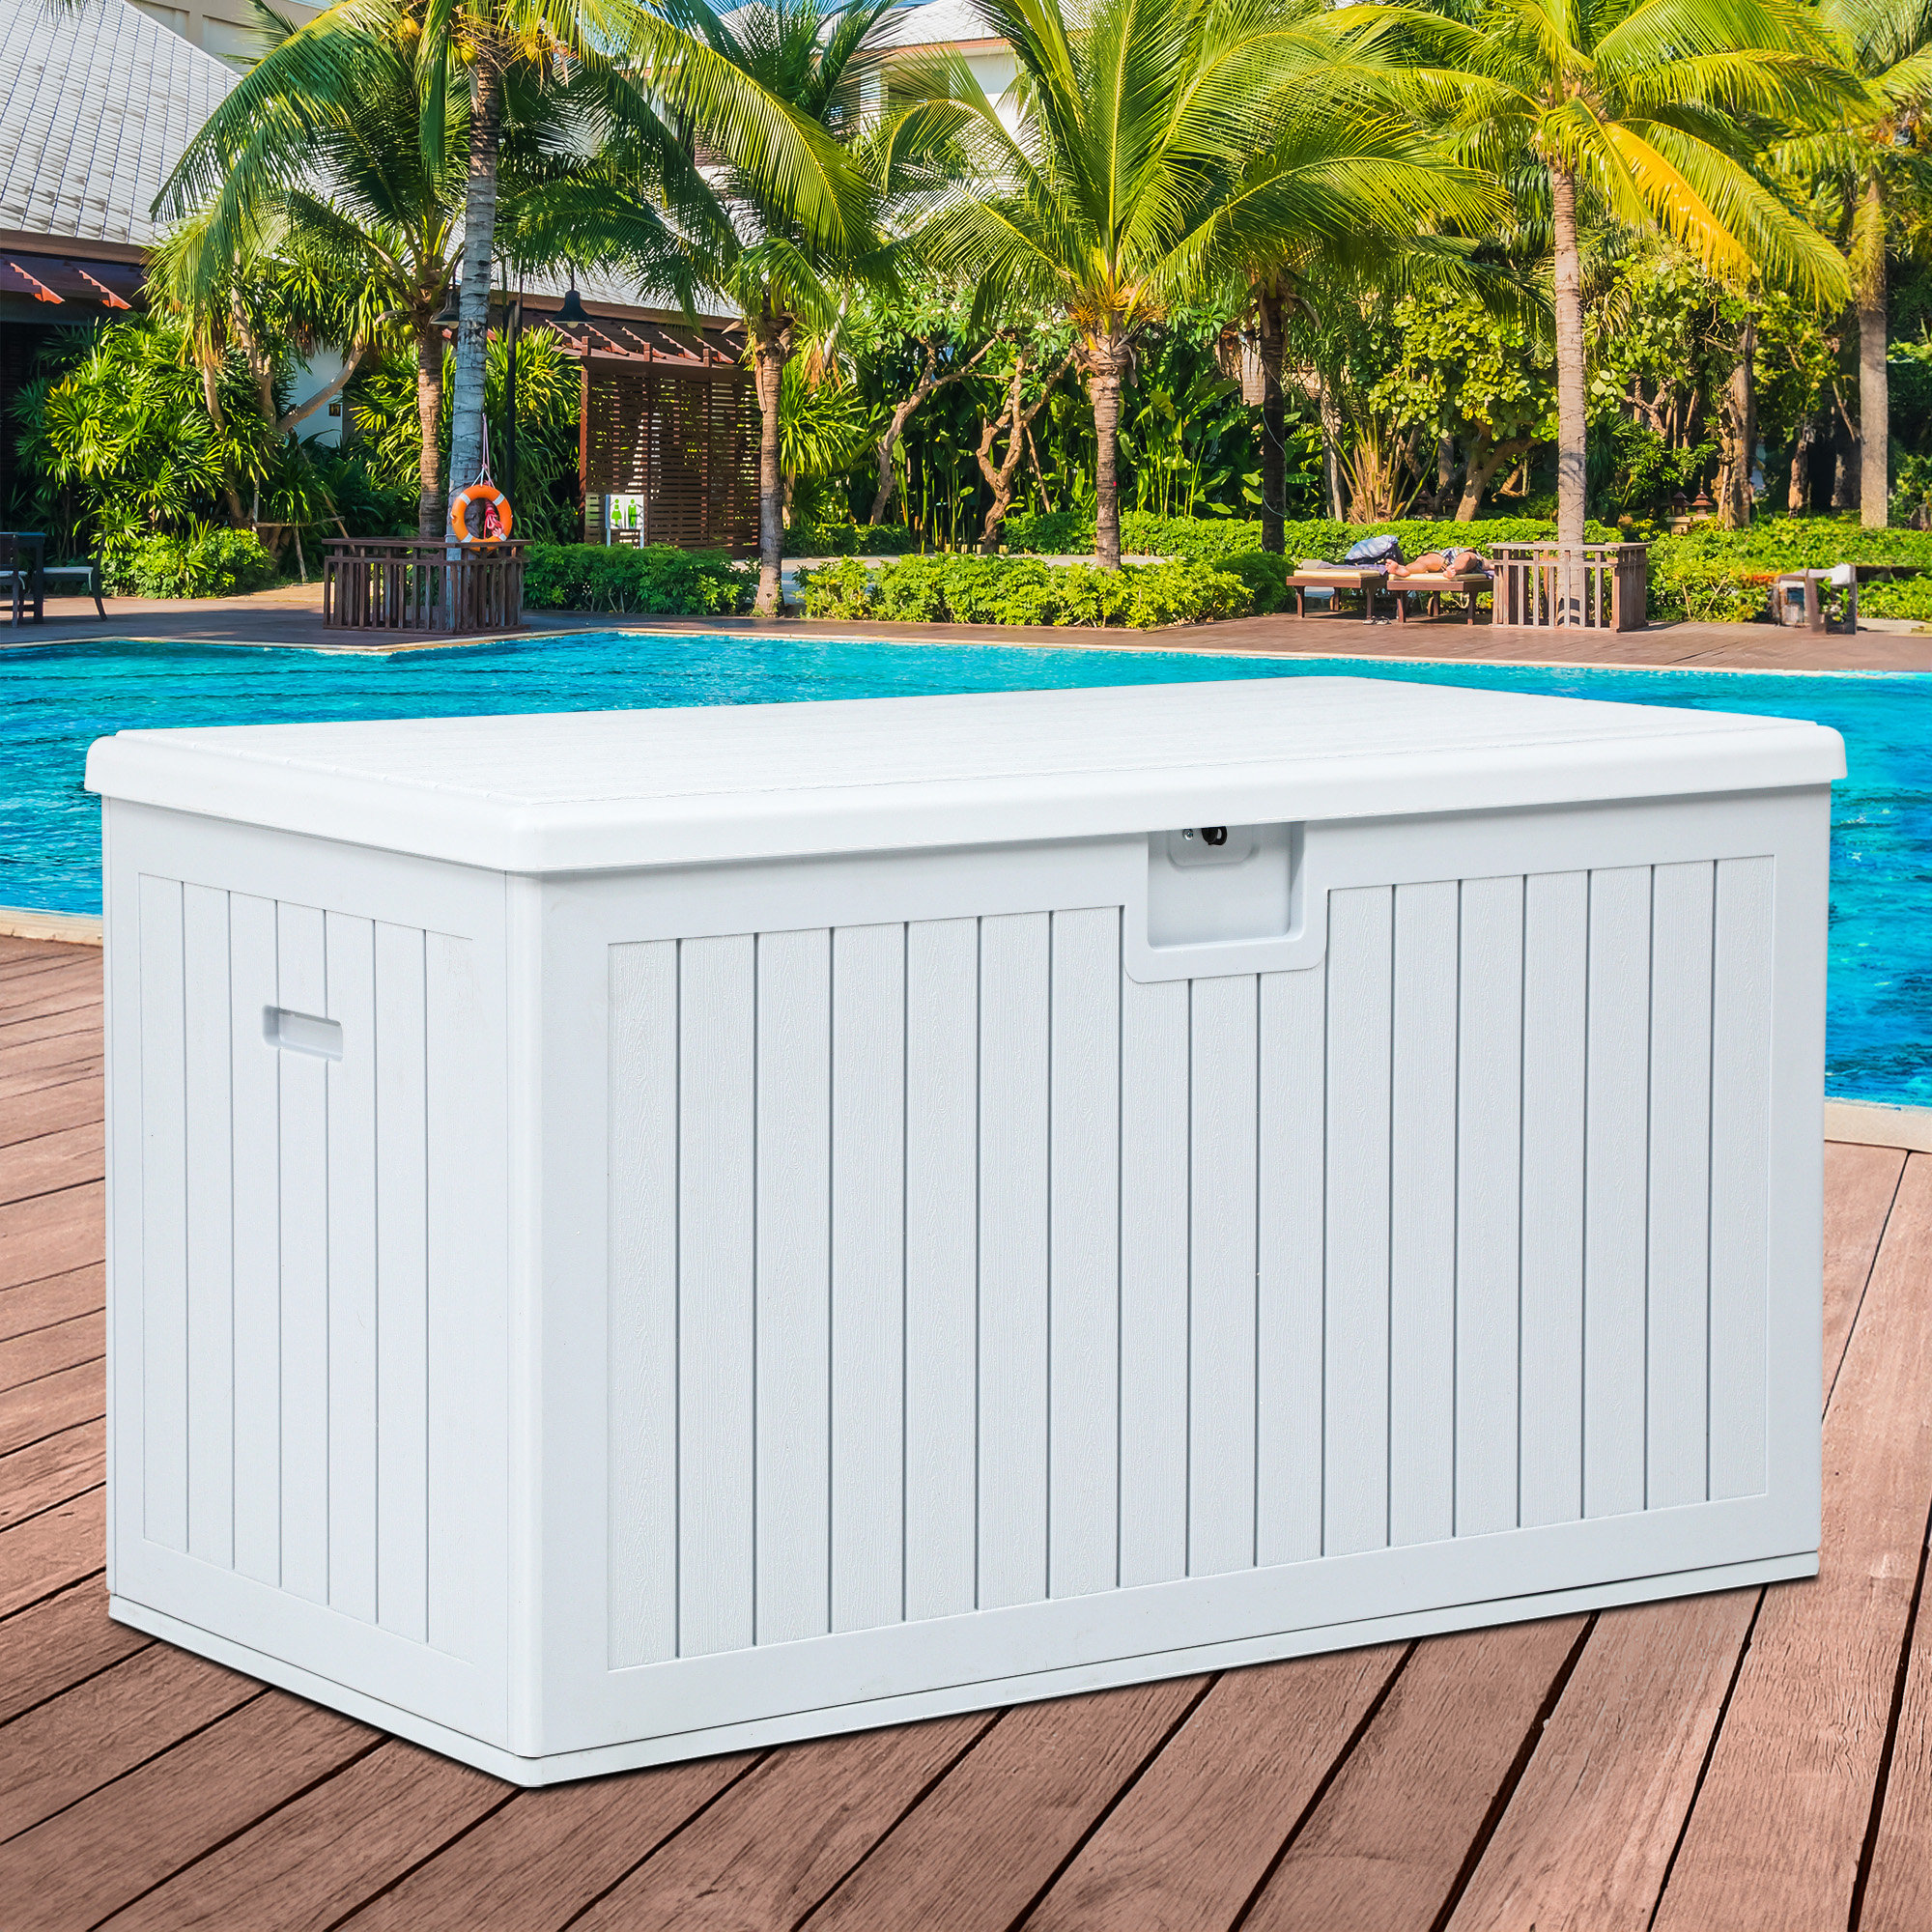 YITAHOME 30 Gallon Deck Box, Outdoor Storage Box for Patio Furniture, Pool  Accessories, Cushions, Garden Tools and Outdoor, Waterproof Resin with